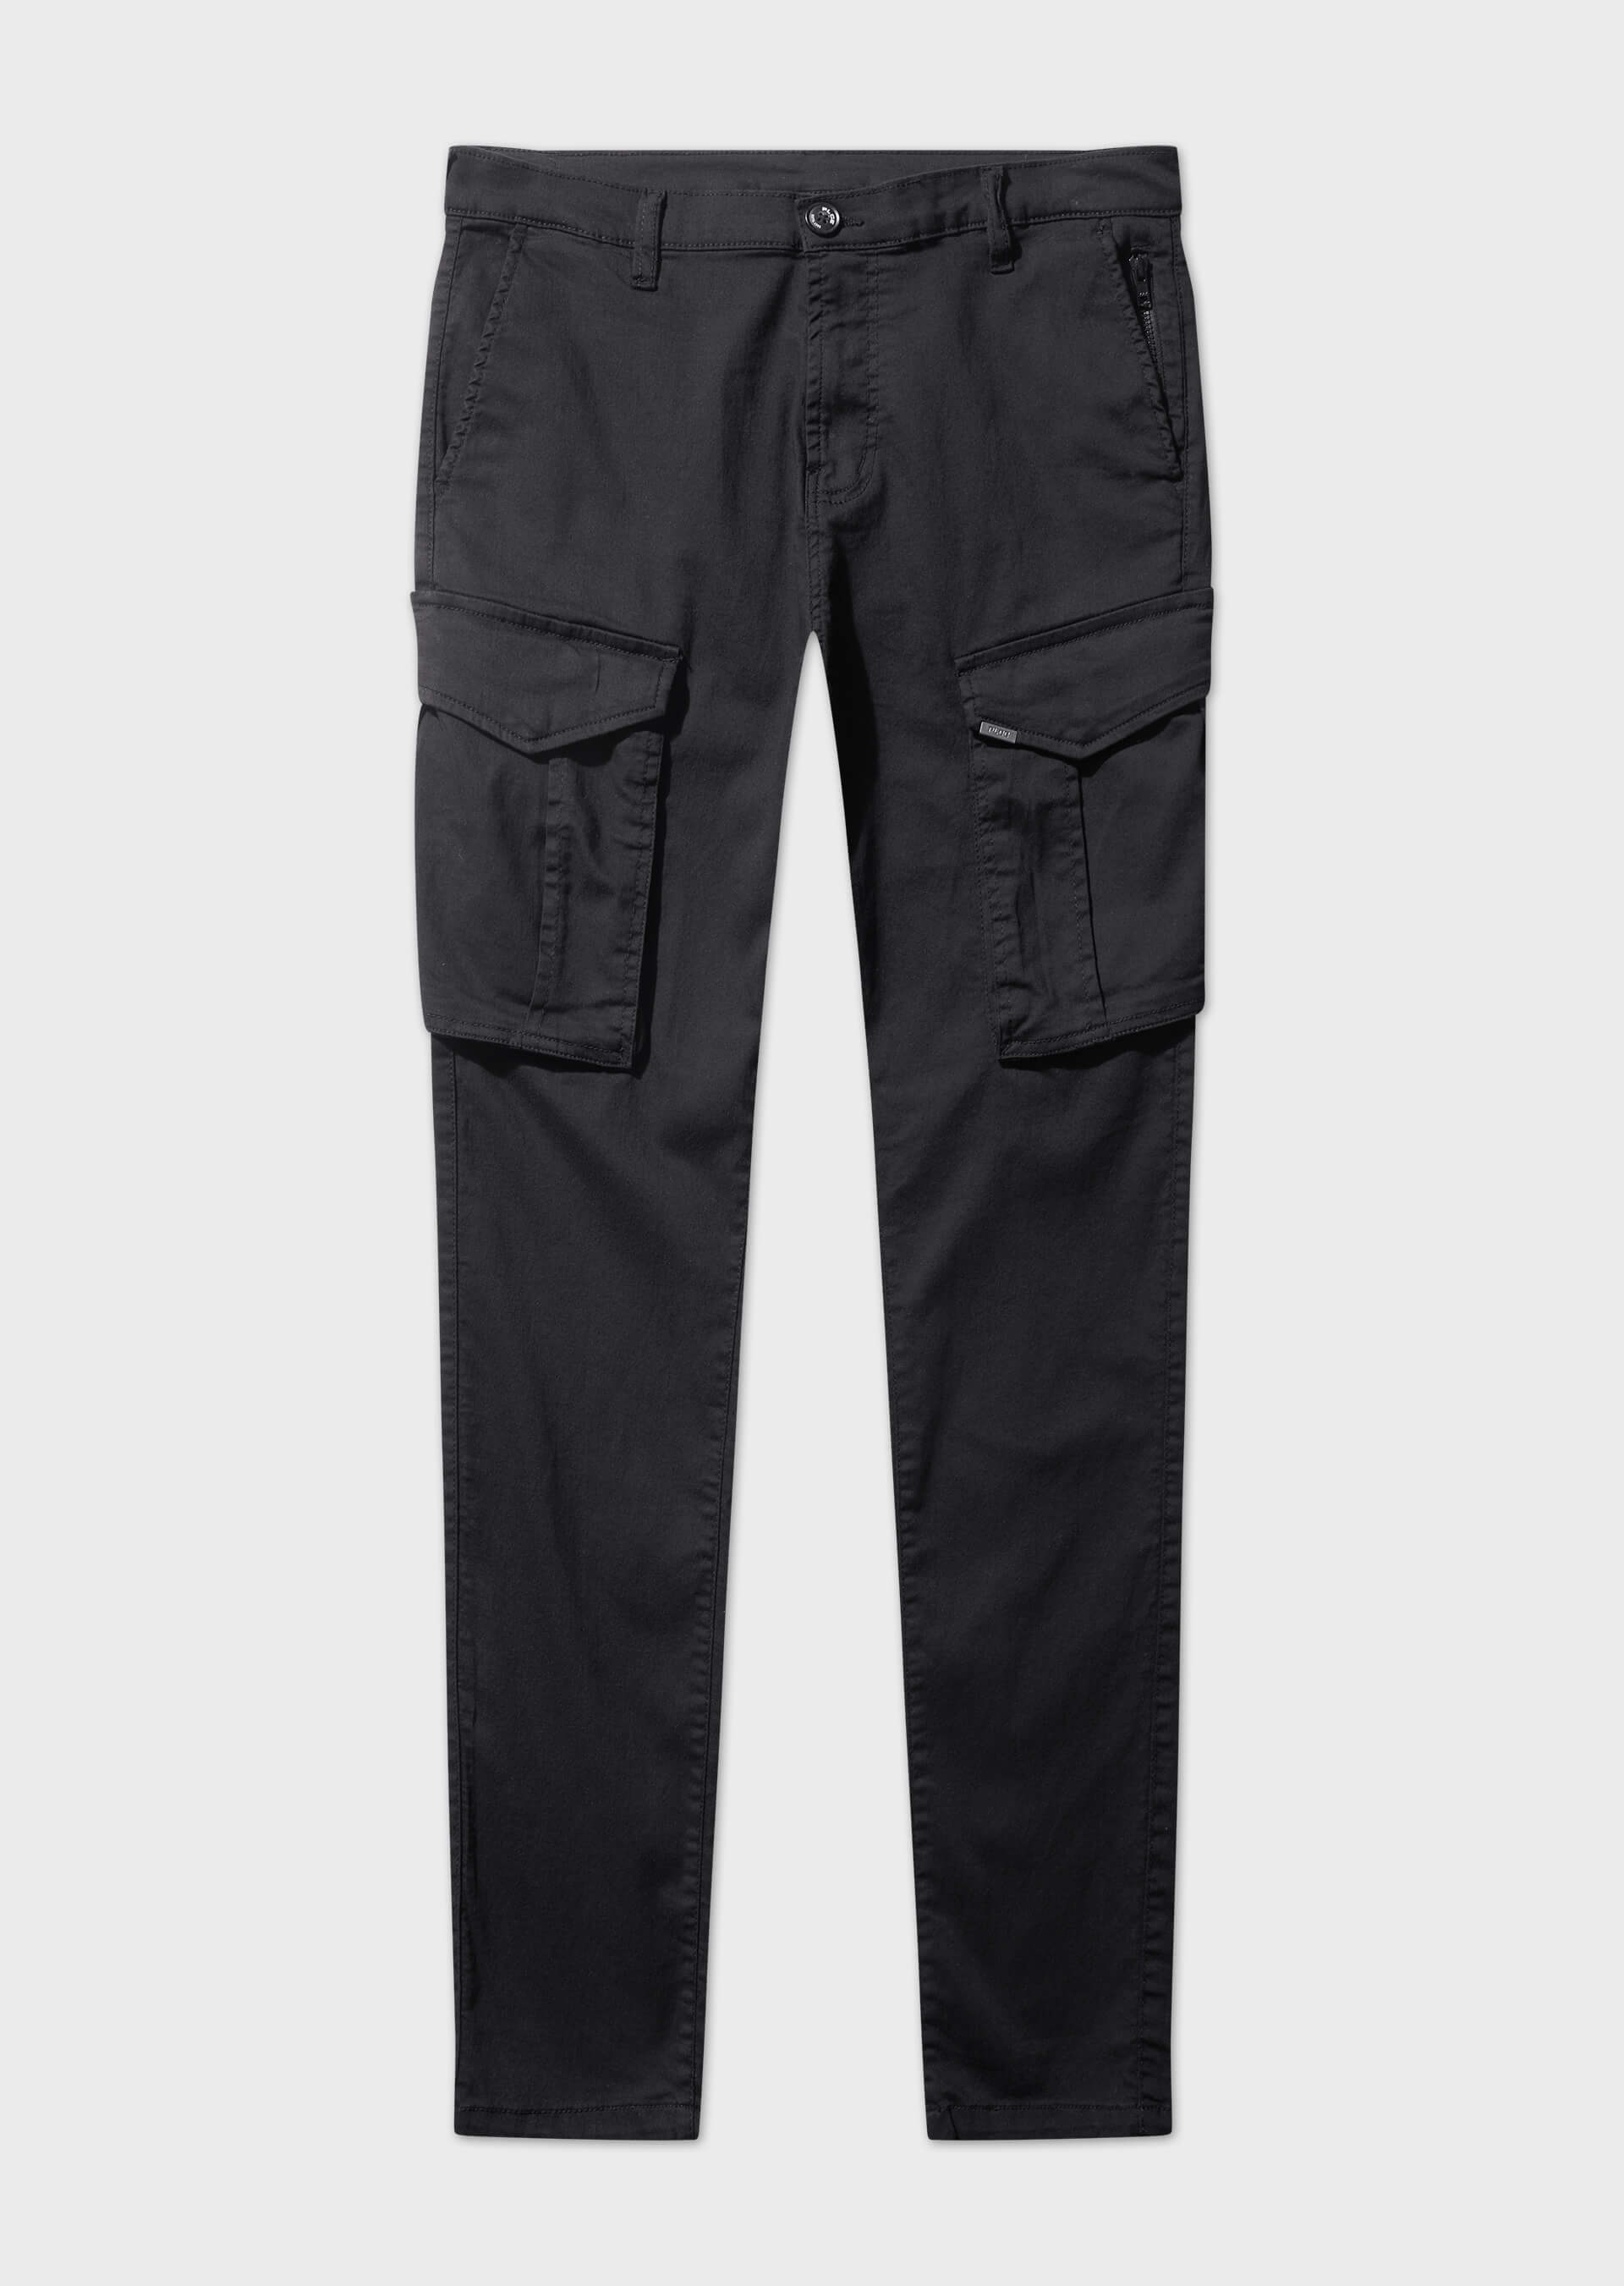 Womens Black Cargo Trousers  Police Supplies